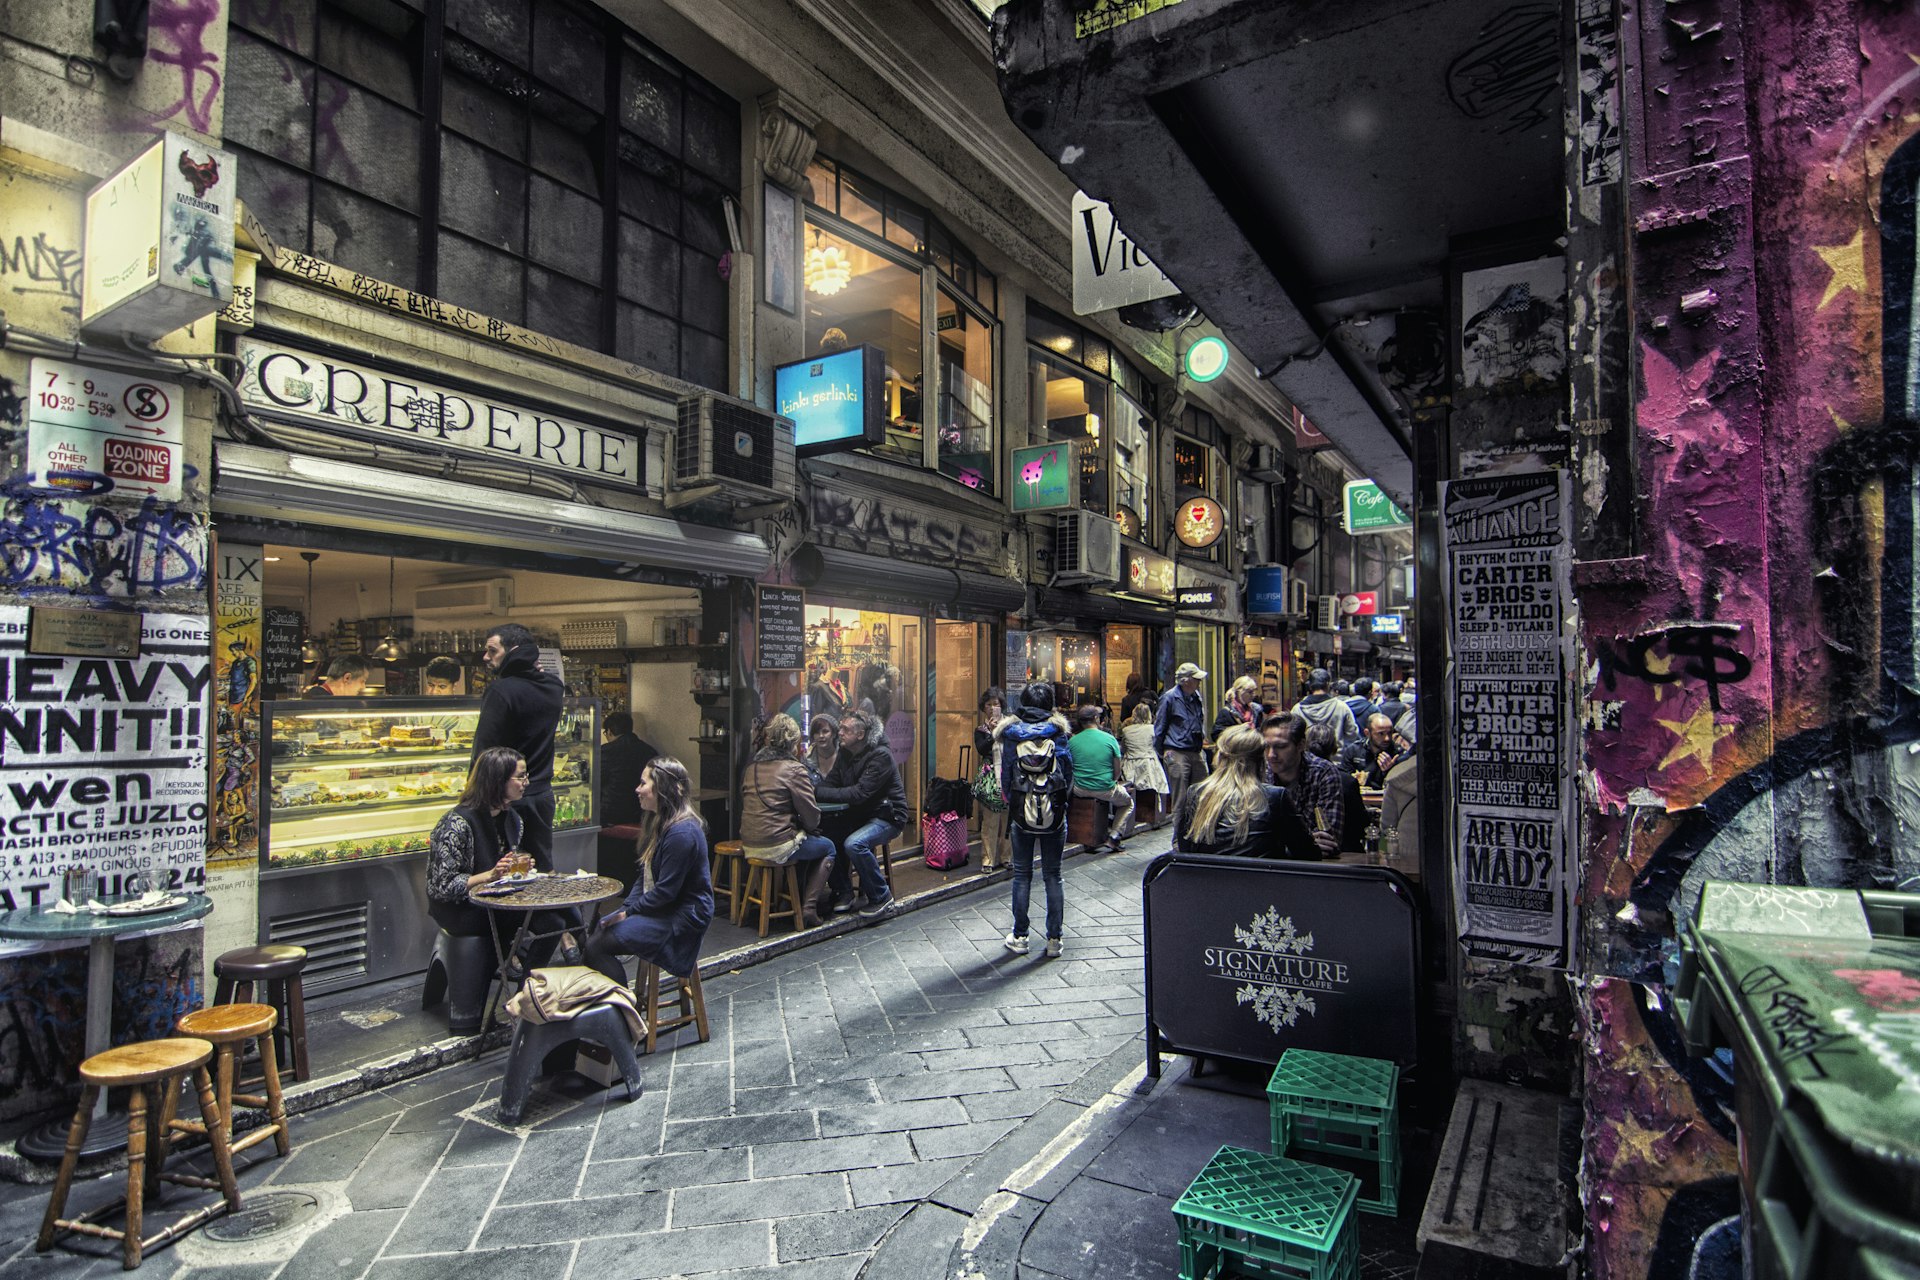 Night time view of the very hip Degraves Street in Melbourne